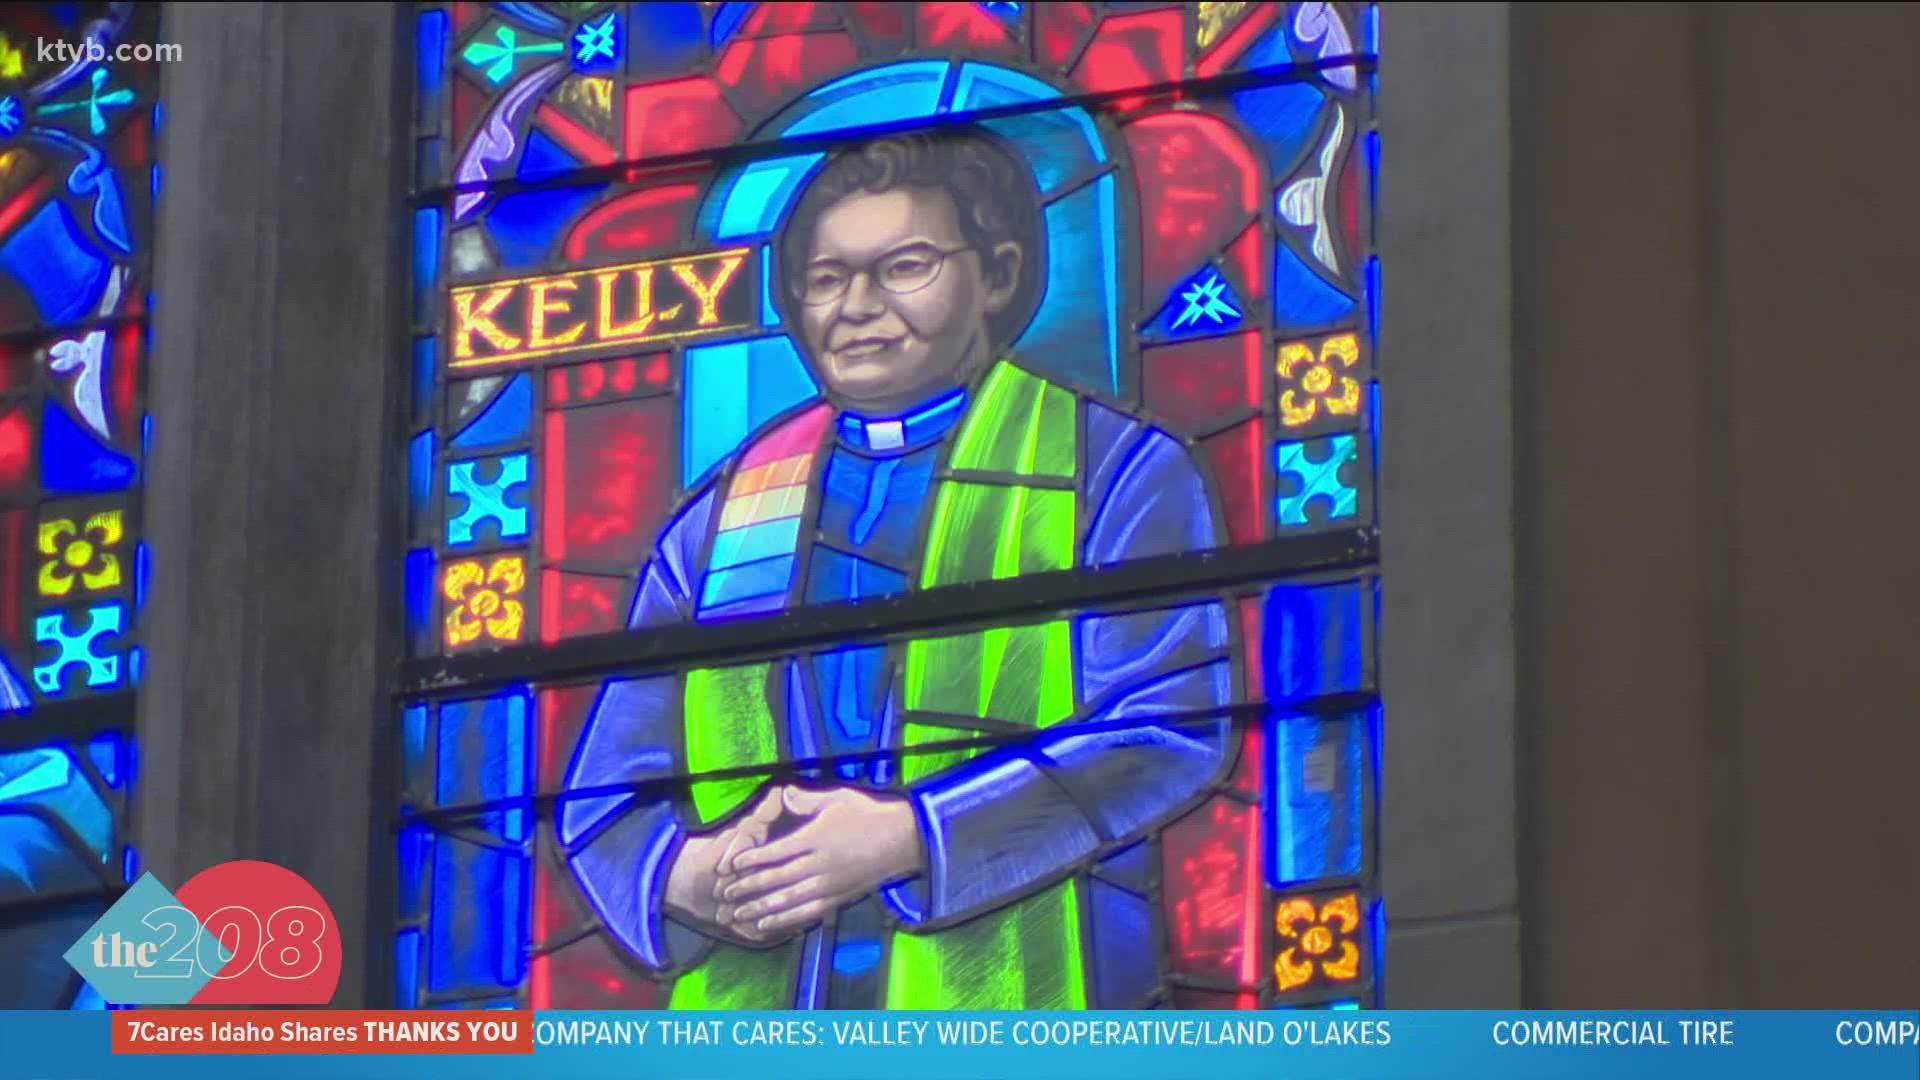 After removing a stained glass image of a Confederate army leader, Cathedral of the Rockies installed a brand new piece featuring Bishop Leontine Kelly.